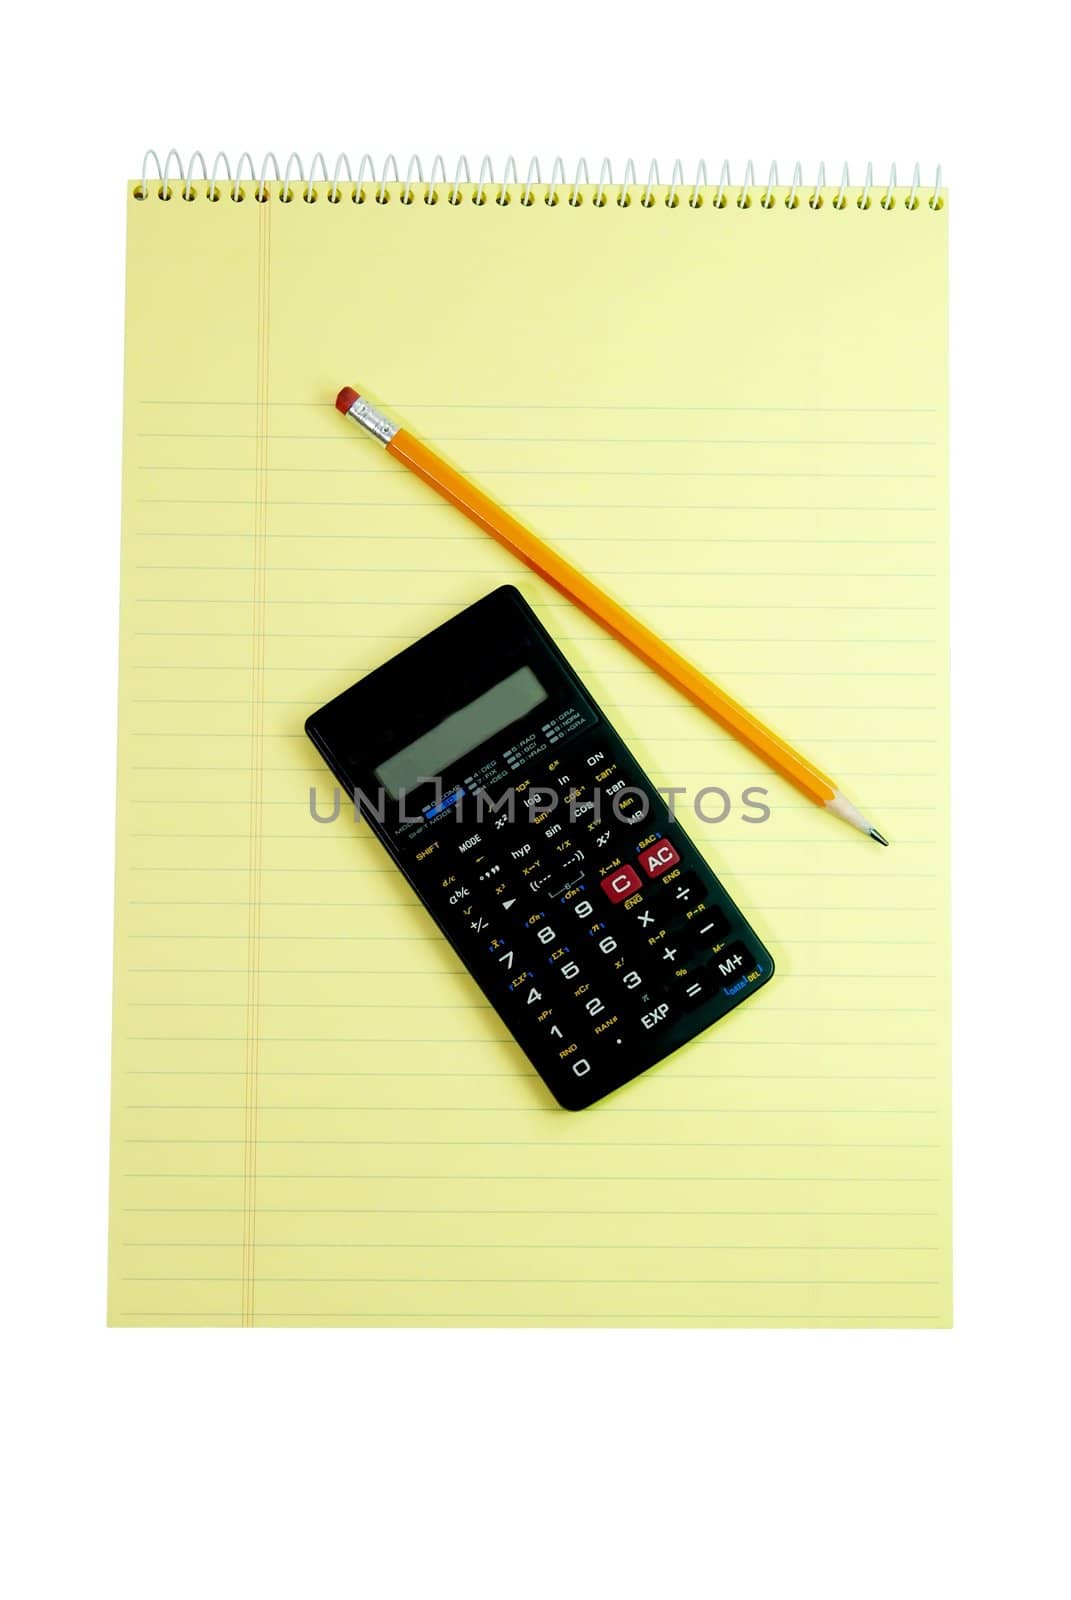 Spiral notebook, calculator, and pencil isolated on white background with clipping path.